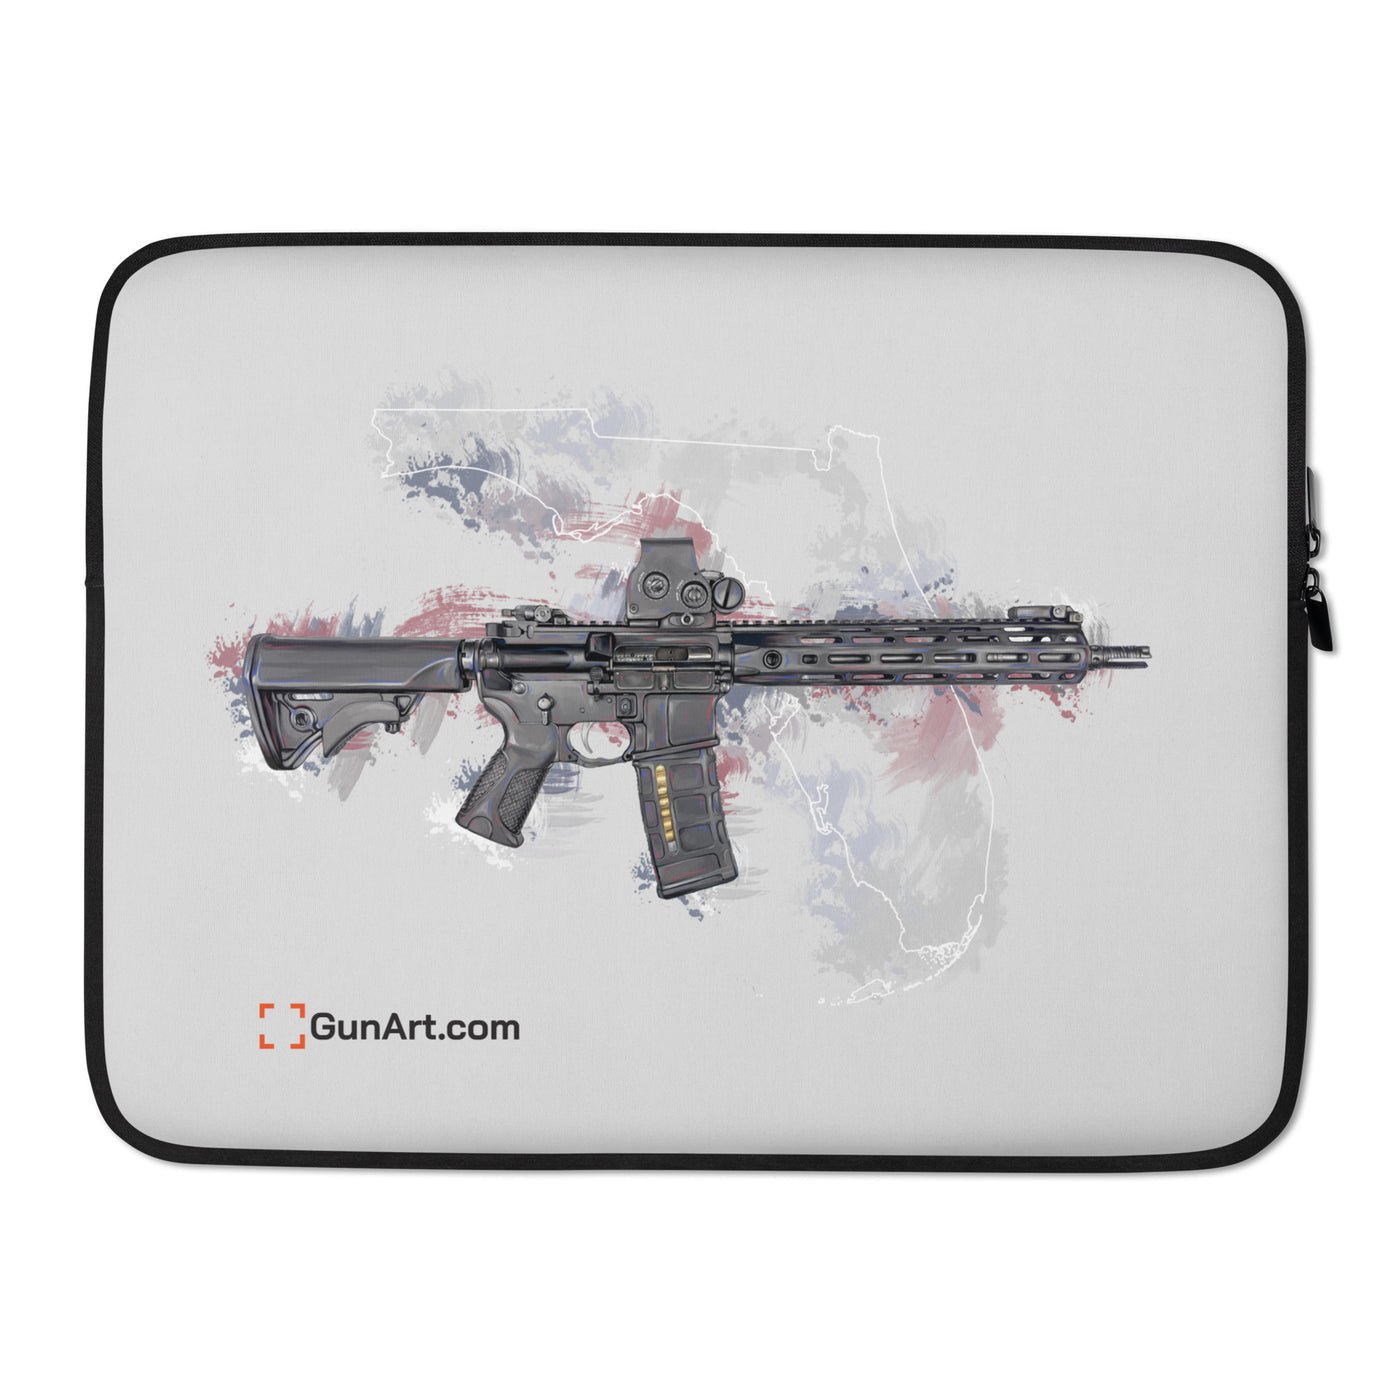 Defending Freedom - Florida - AR-15 State Laptop Sleeve - White State